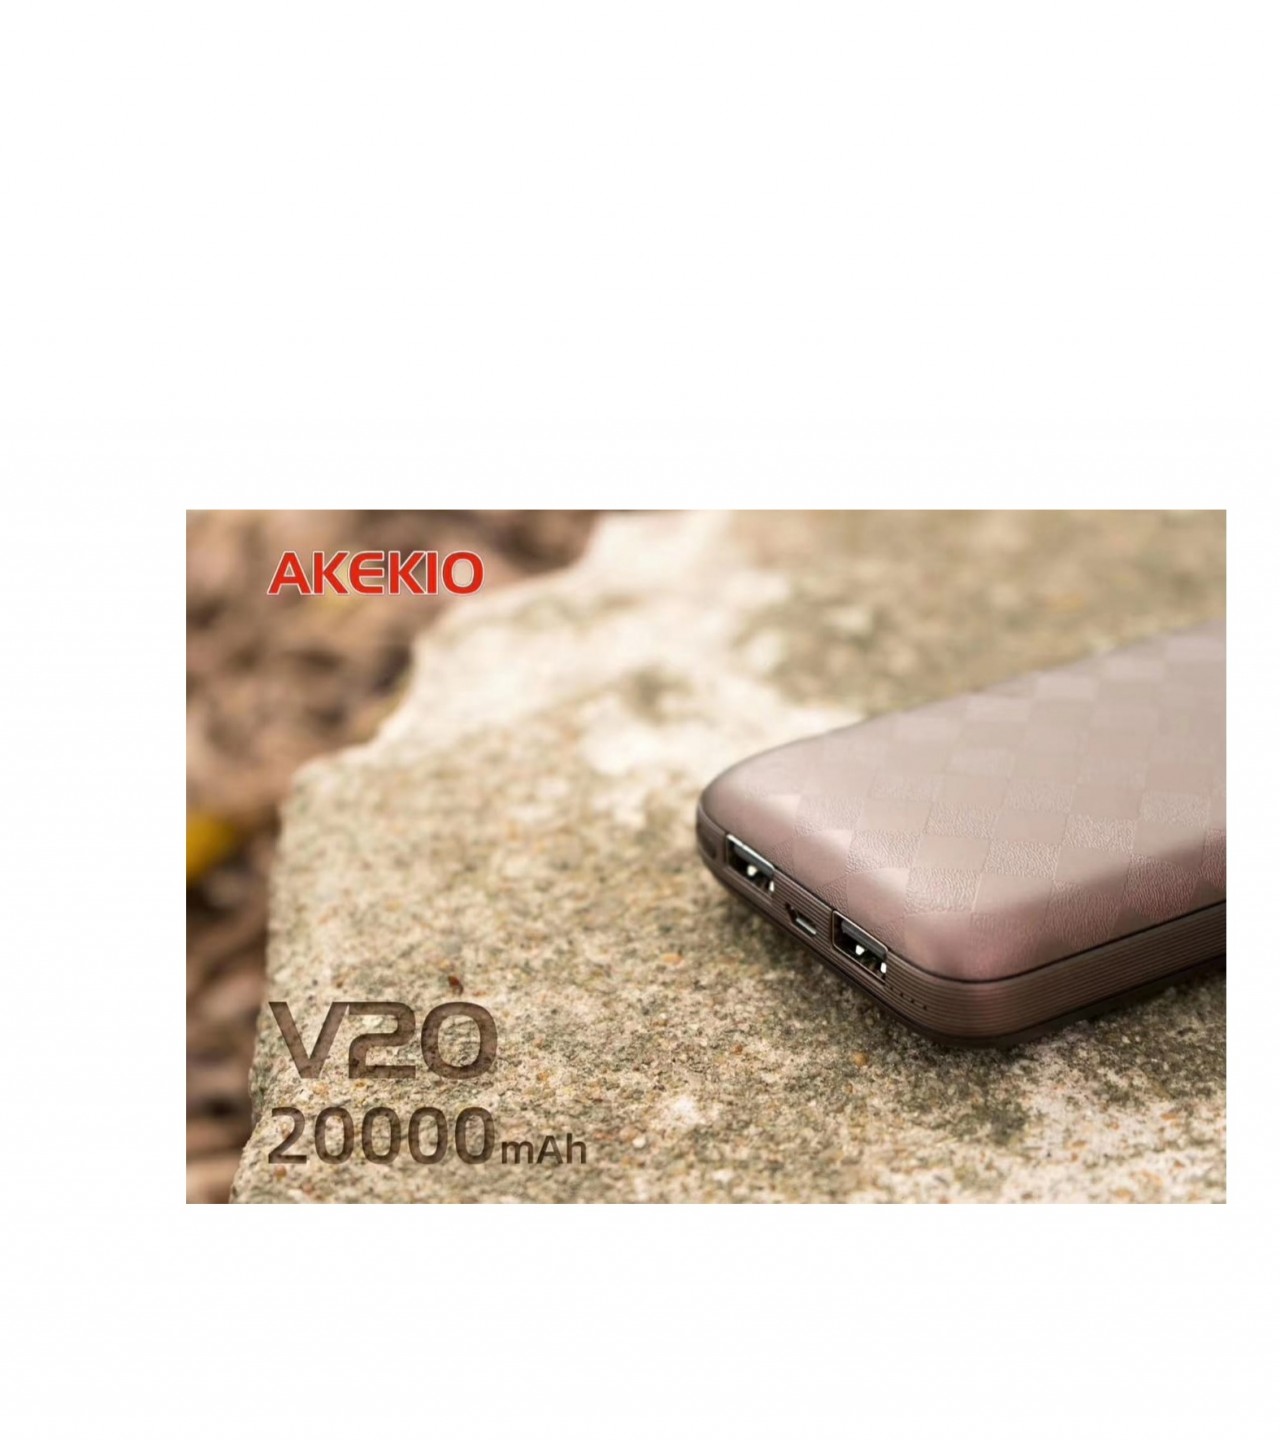 Power Bank For All Devices, 20000 mAh, V20  SG191